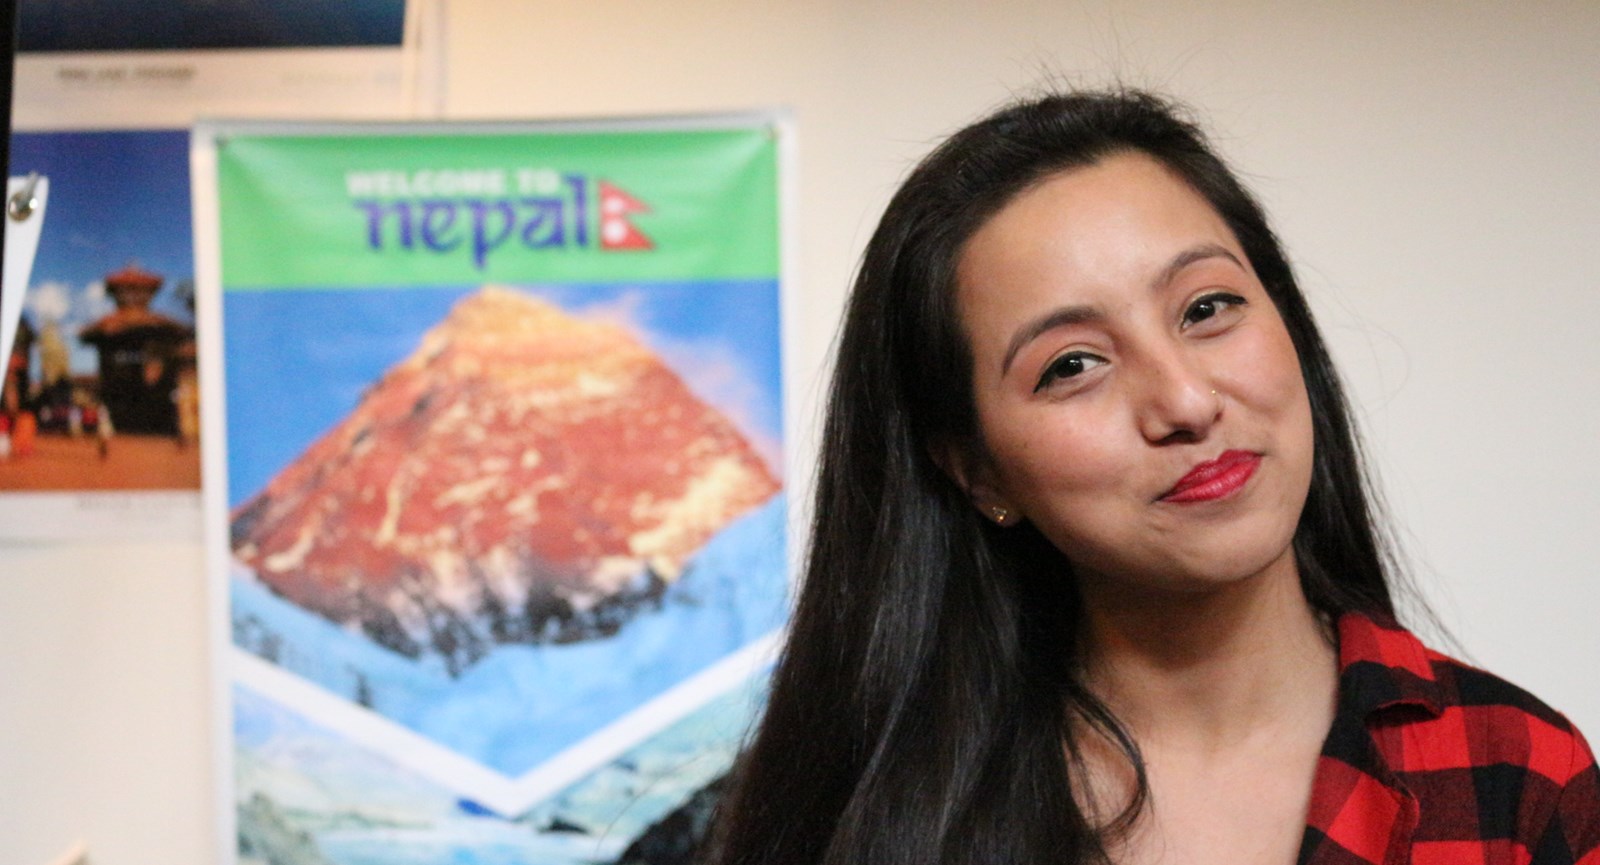 Student smiling in front of poster about Nepal